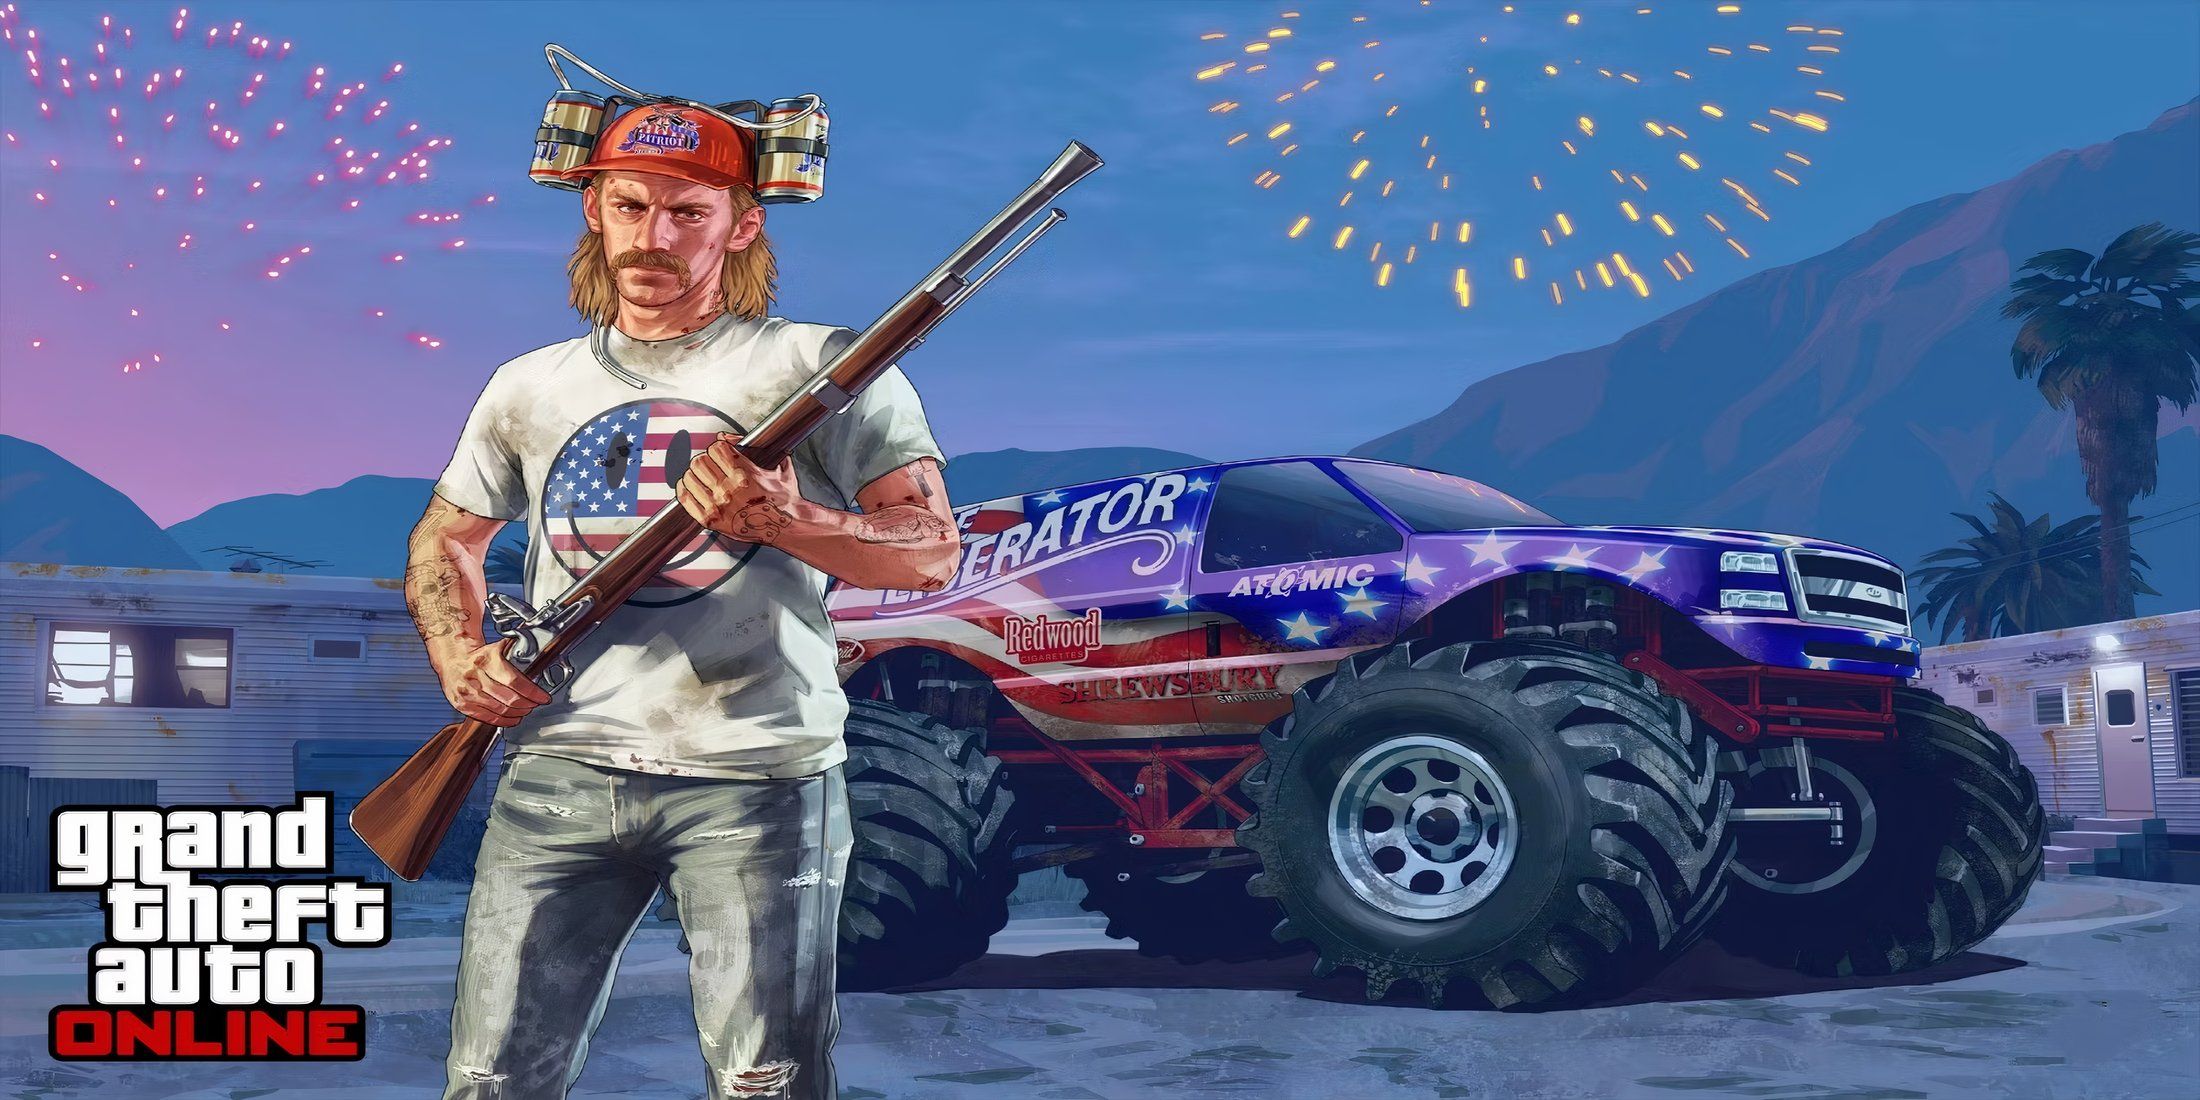 Grand Theft Auto Online art showing character with musket and monster truck